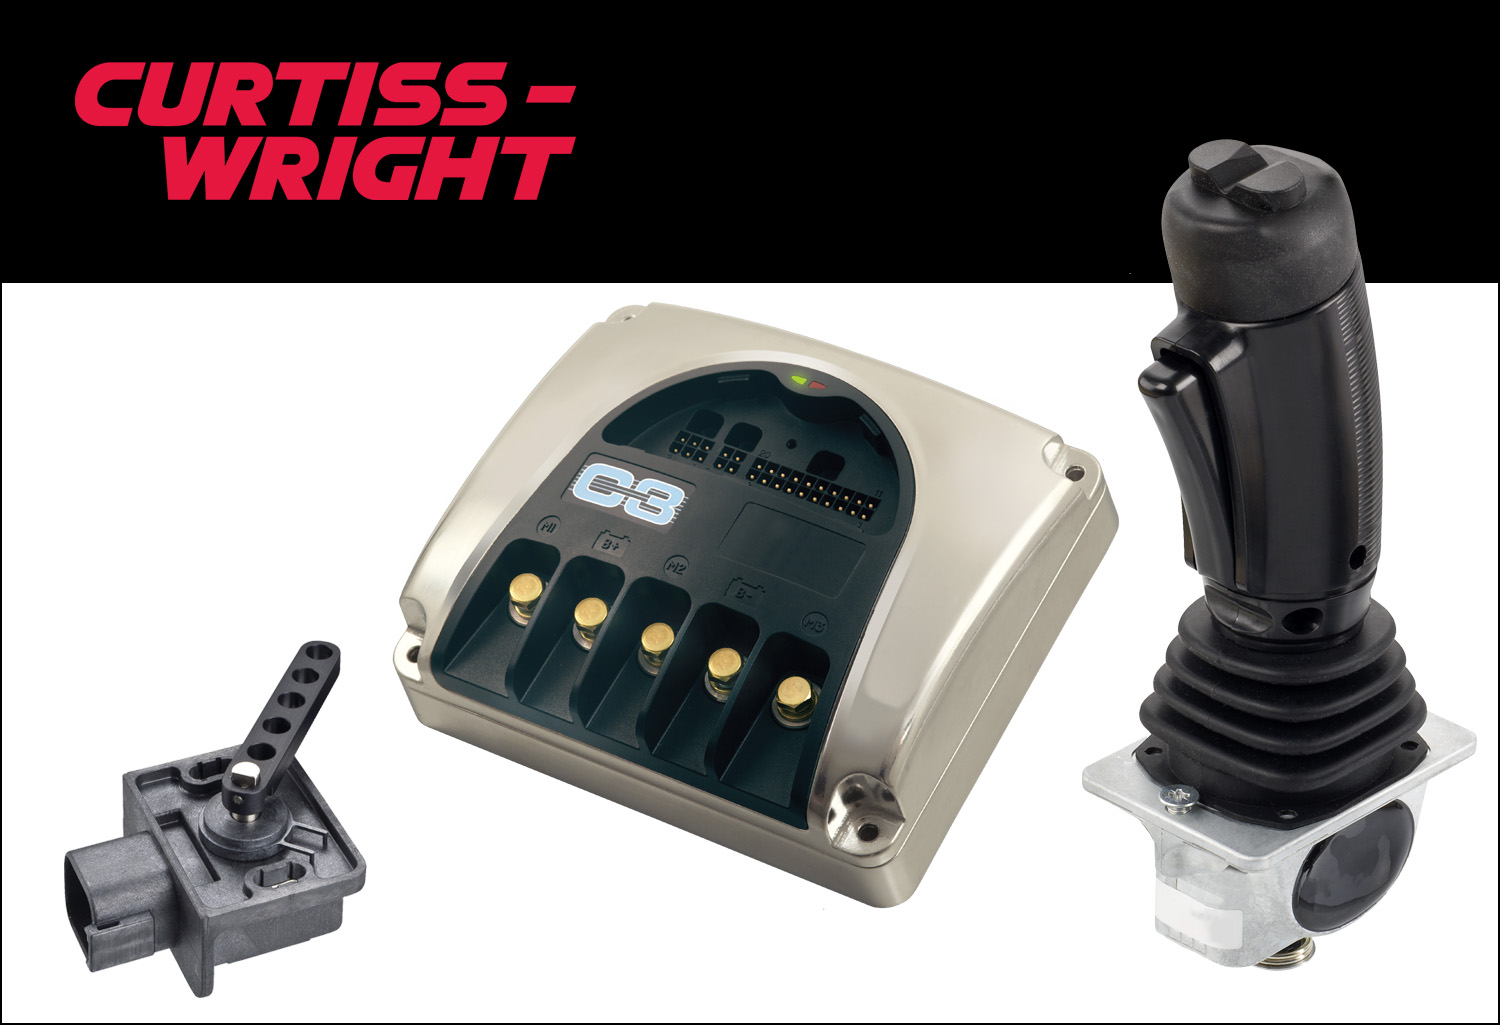 Rekarma A.S. has been appointed as distributor for Curtiss-Wright Corporation's Industrial division